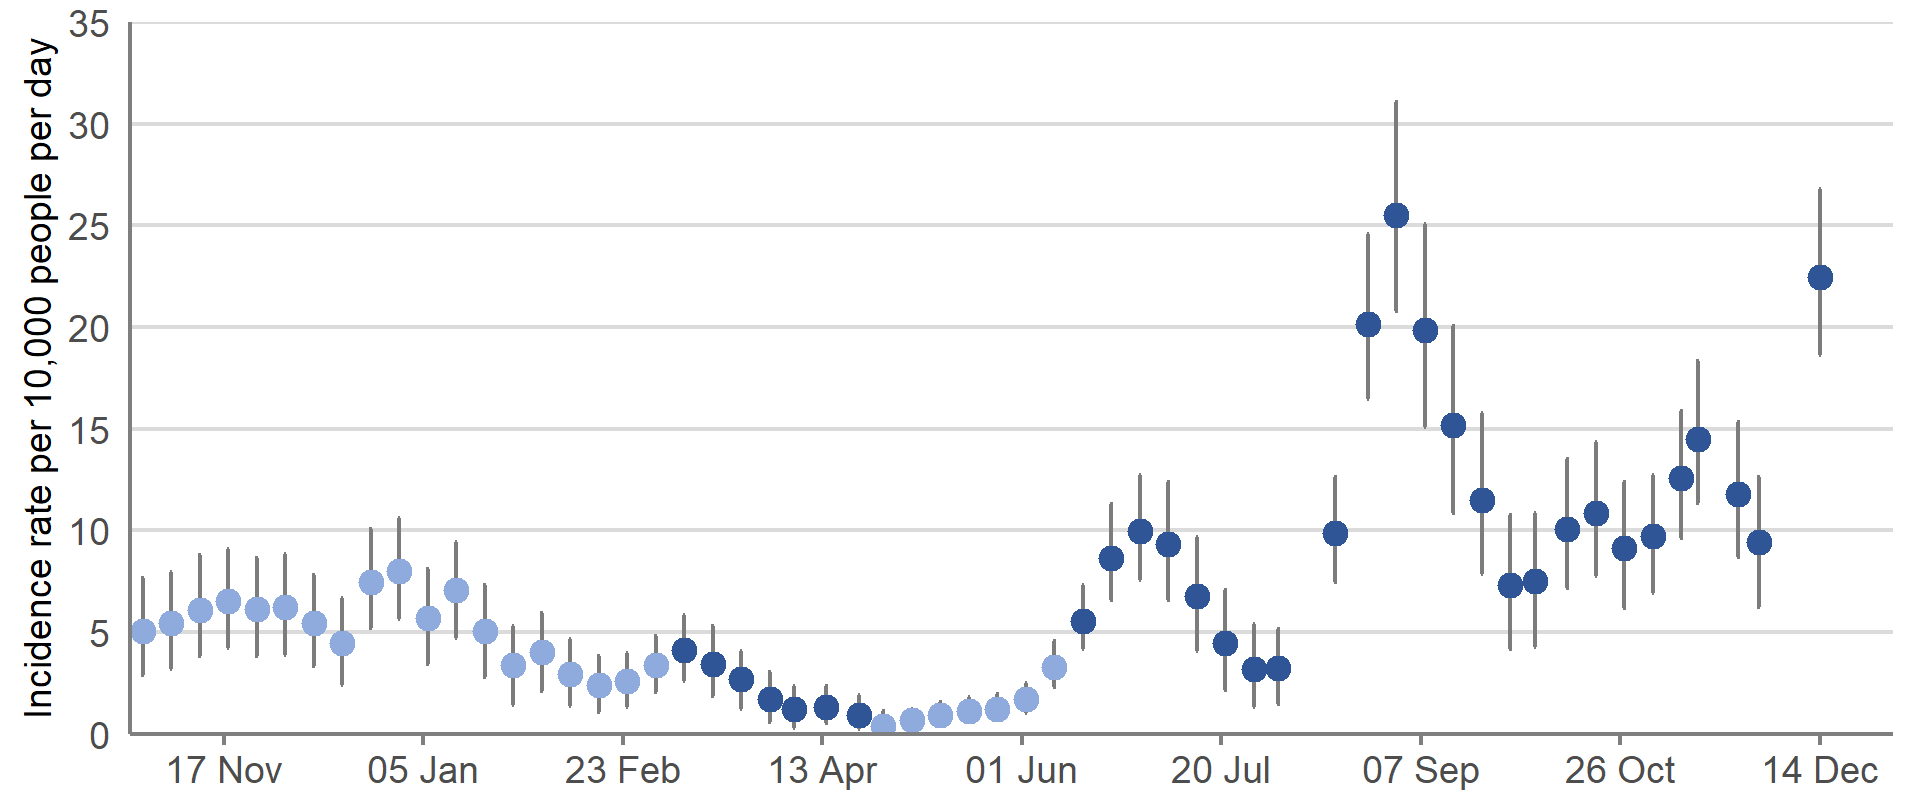 The trend in the official reported/indicative estimates of incidence rates in Scotland increased from the middle of August 2021, after weeks of a decreasing trend. The rate of increase then slowed and decreased up to the beginning of October. This was followed by a few weeks of fluctuation in estimates. The estimate of the incidence of new PCR positive COVID-19 cases has increased in the most recent week.